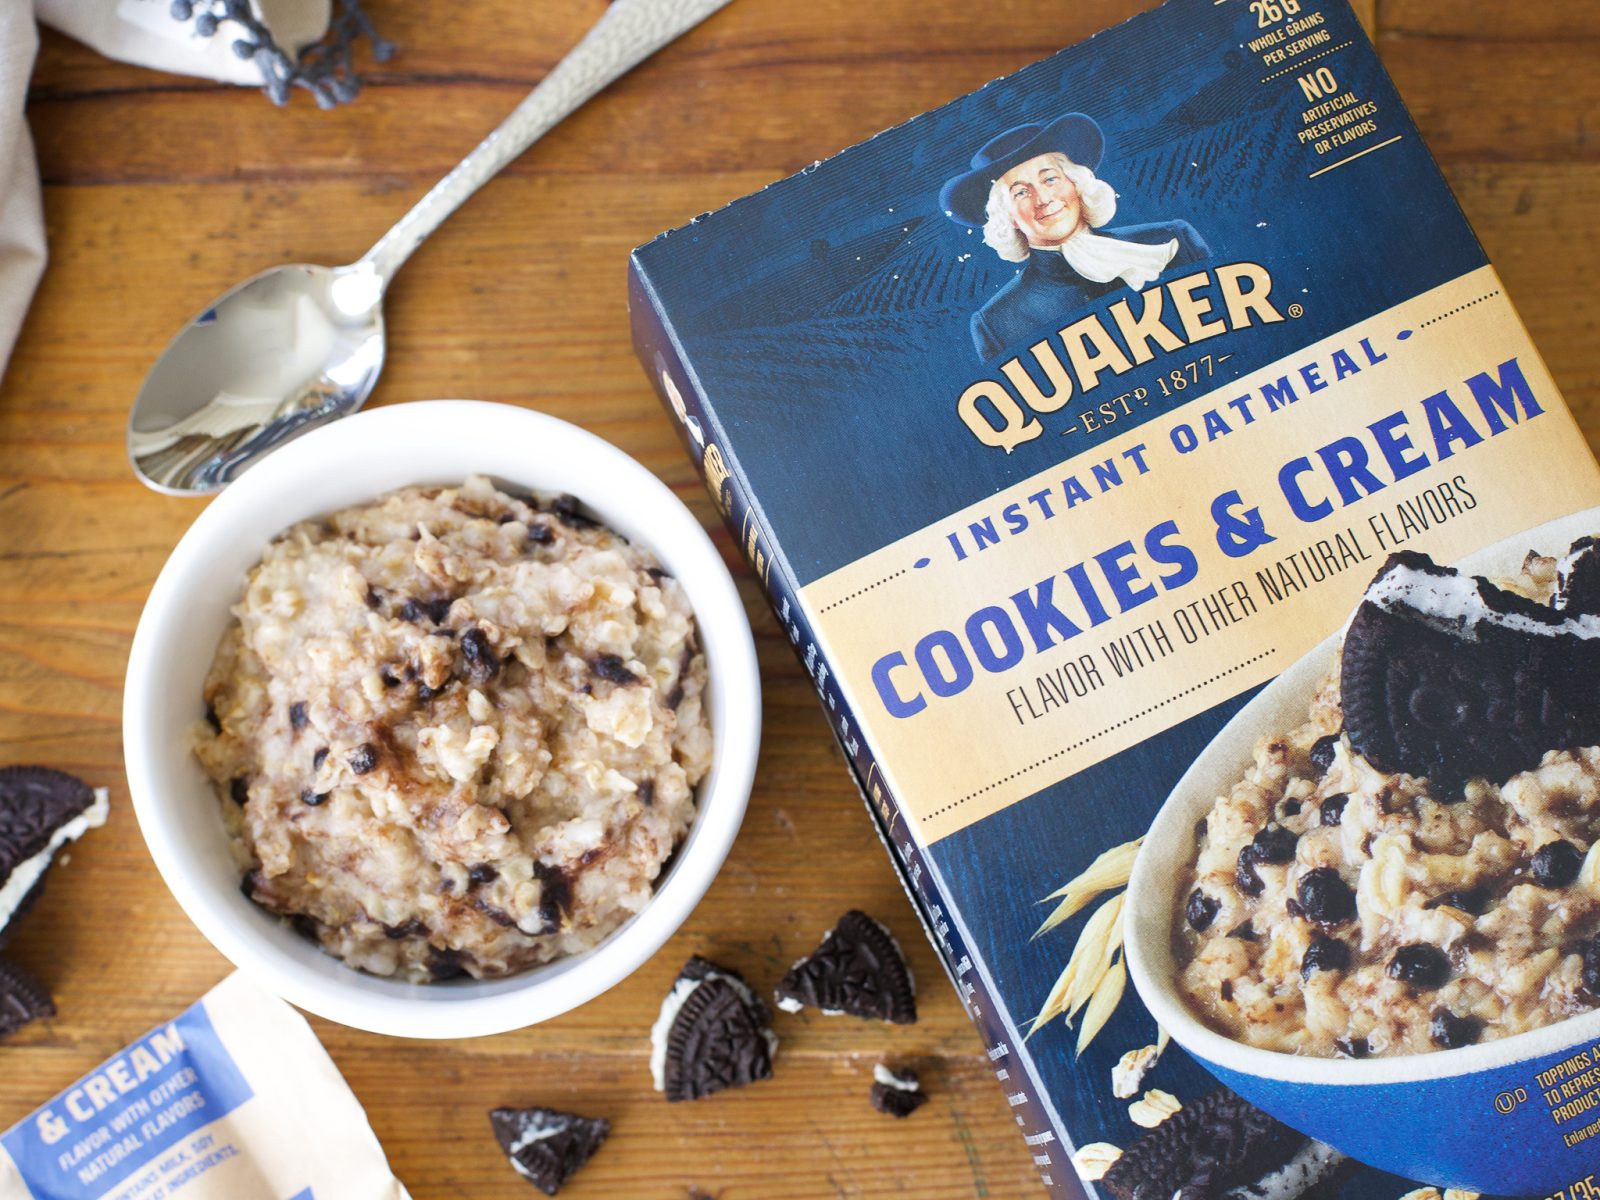 Quaker Instant Oatmeal As Low As 54¢ At Kroger